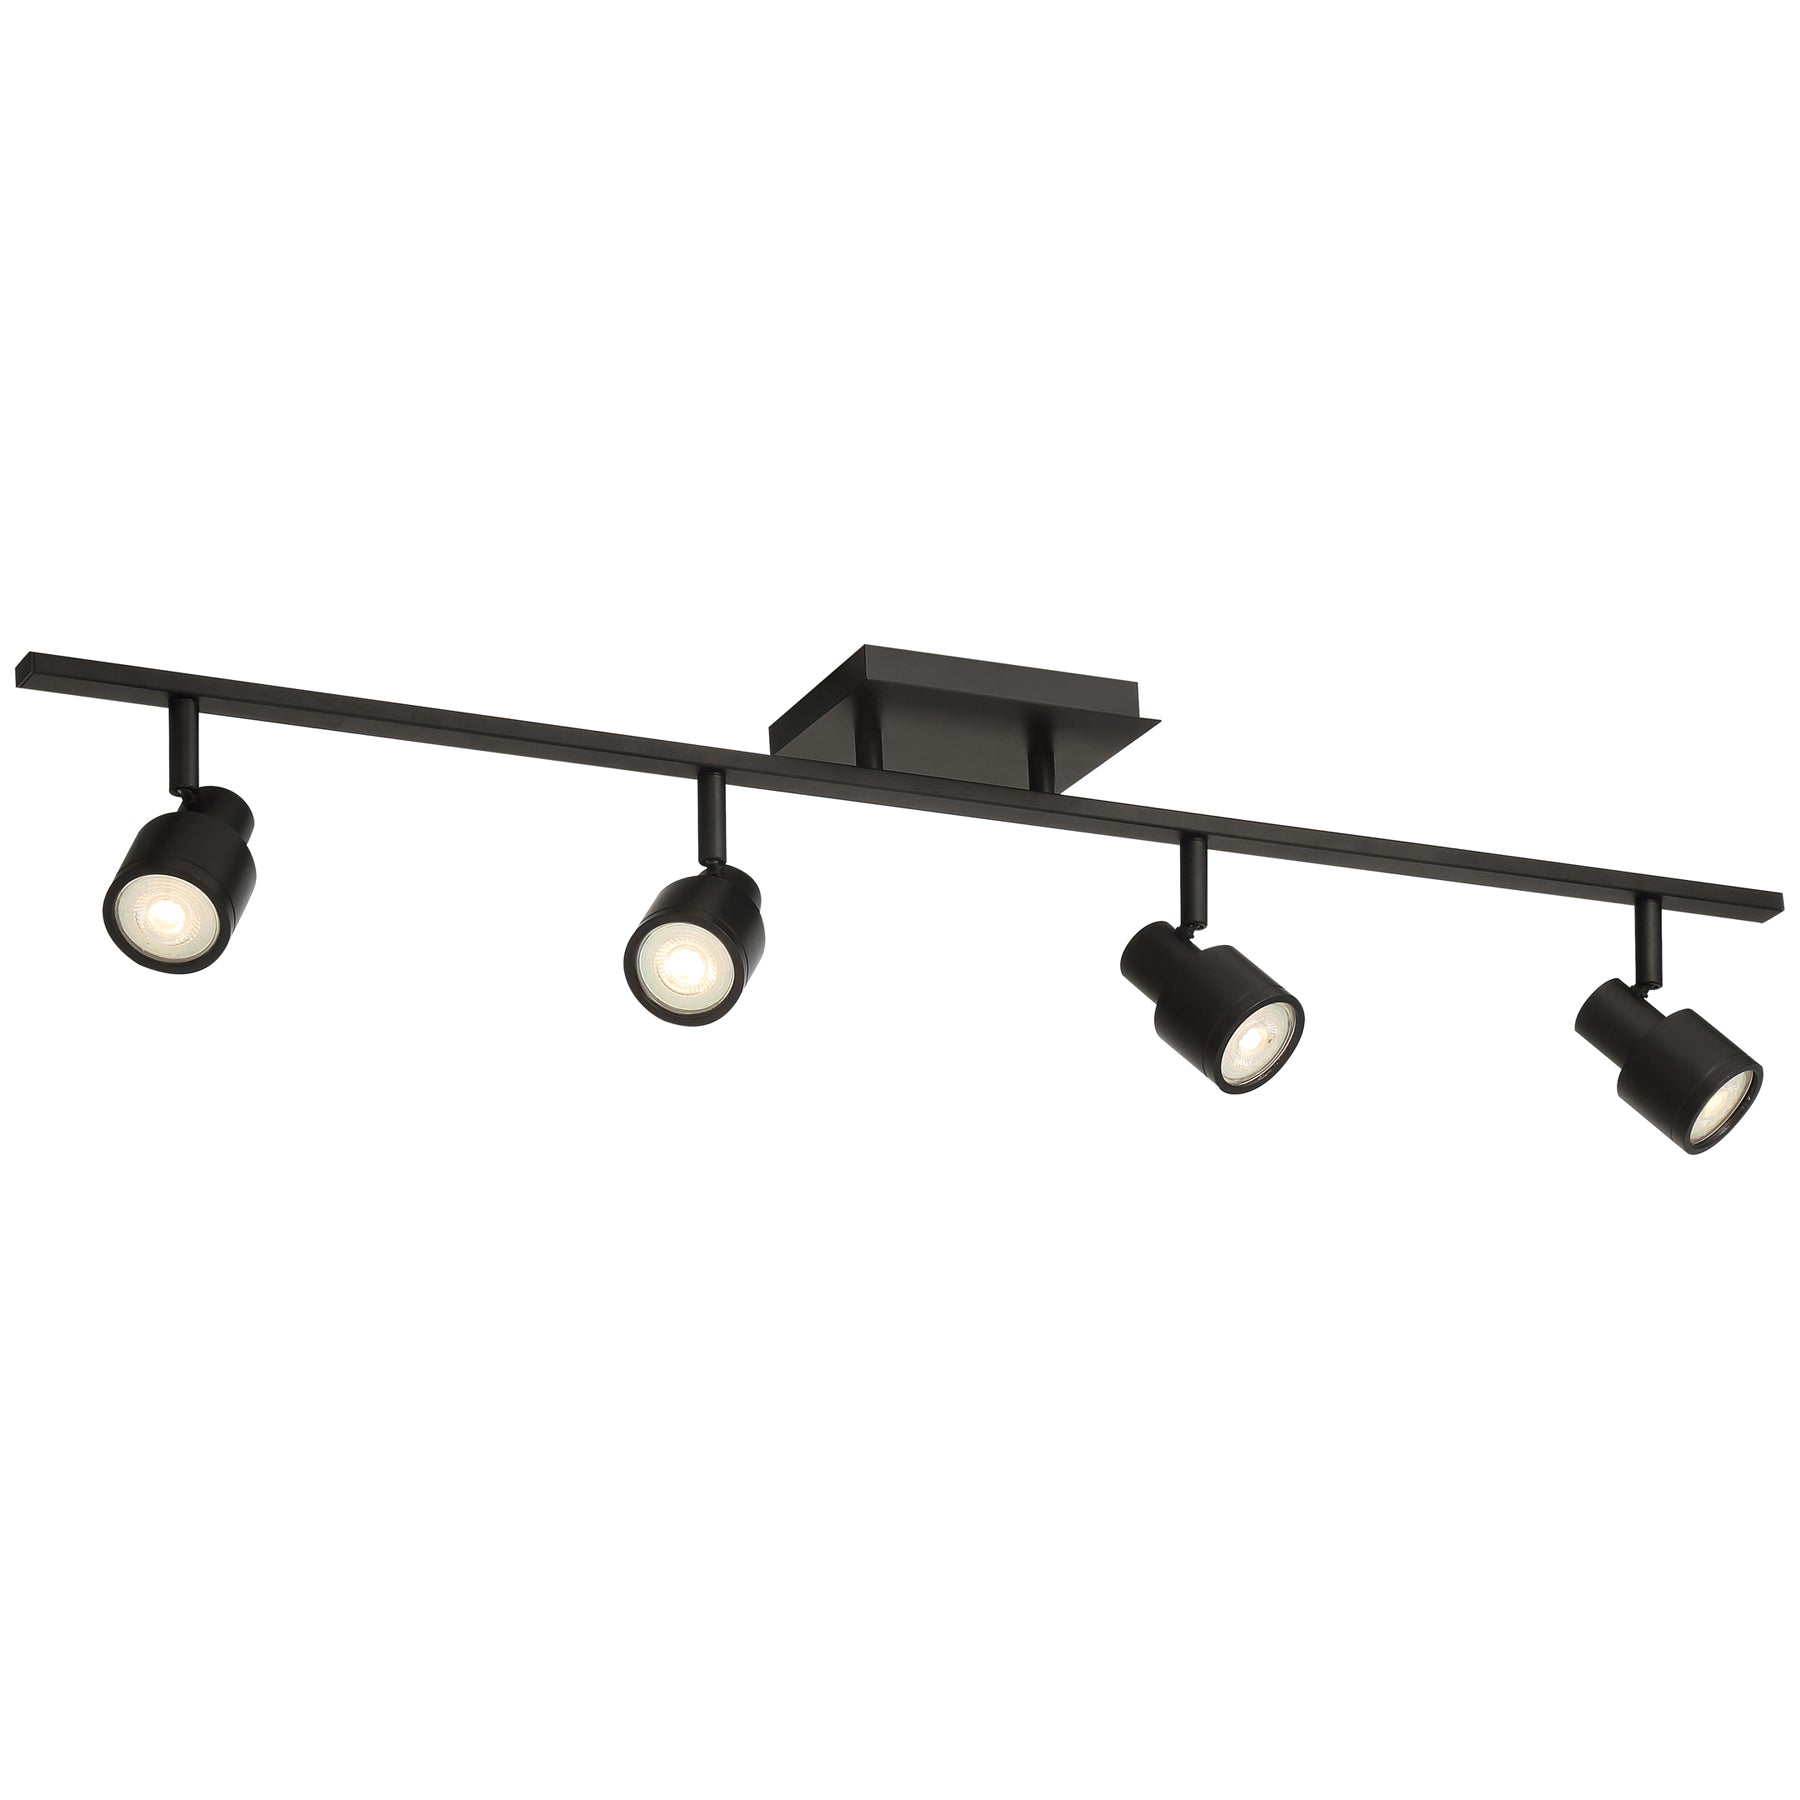  View details for Lincoln 6.5" LED Modern Track Lighting Fixture Matte Black Lincoln 6.5" LED Modern Track Lighting Fixture Matte Black